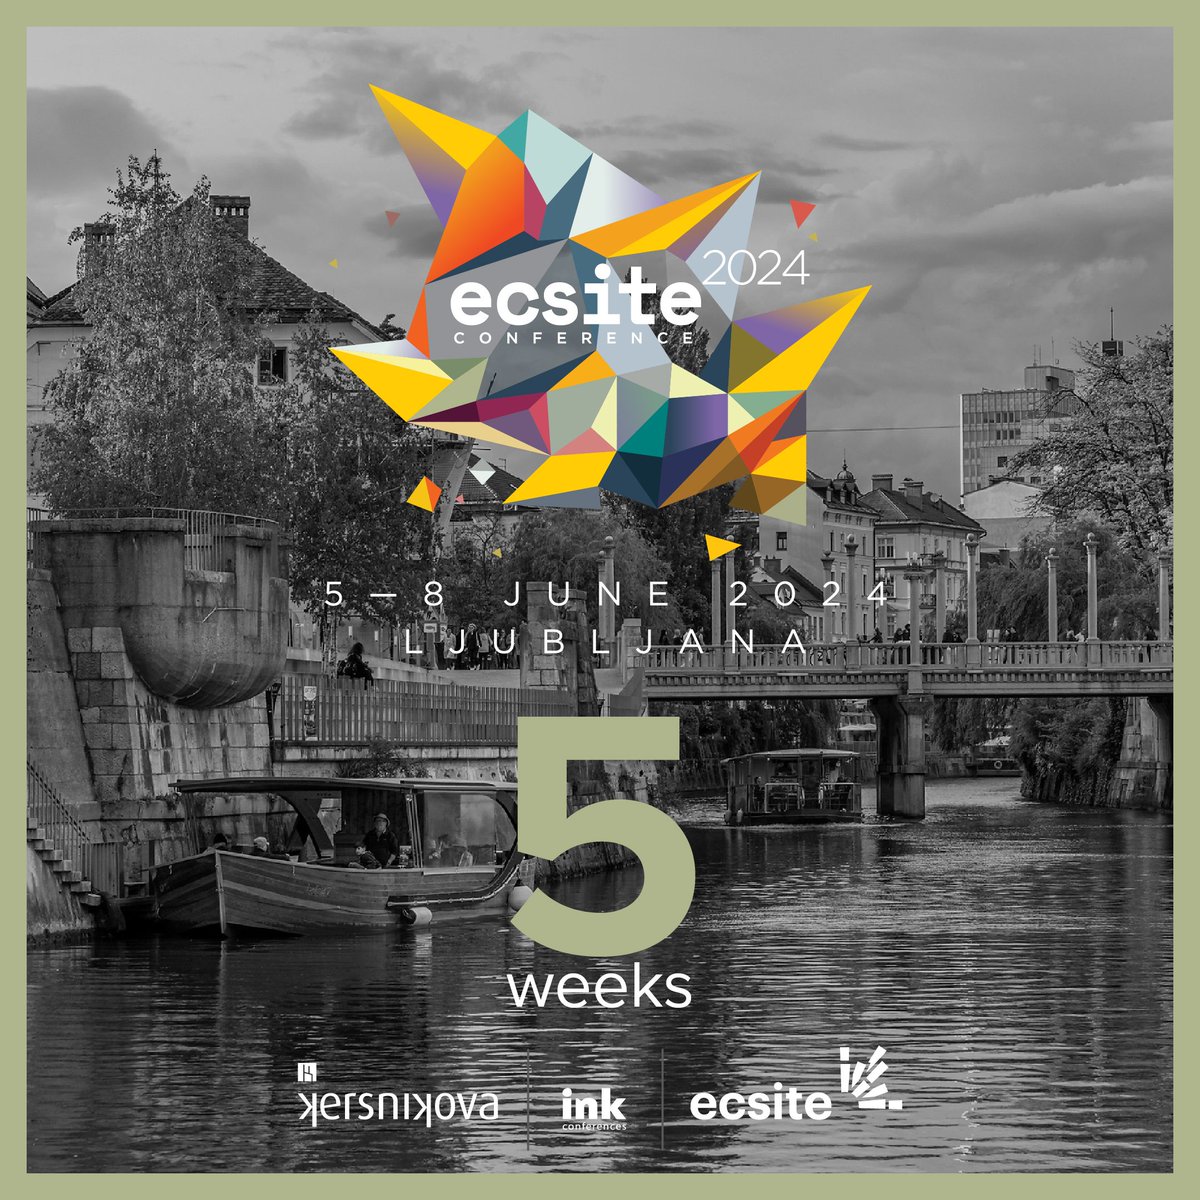 📢 Only 5 weeks until #Ecsite2024! Share your experiences, learn from others, and contribute to the evolution of the science communication field. Don't miss out! Register now, 5-8 June in Ljubljana, Slovenia 👉 buff.ly/3QRDqu3 #Ecsite #scicomm